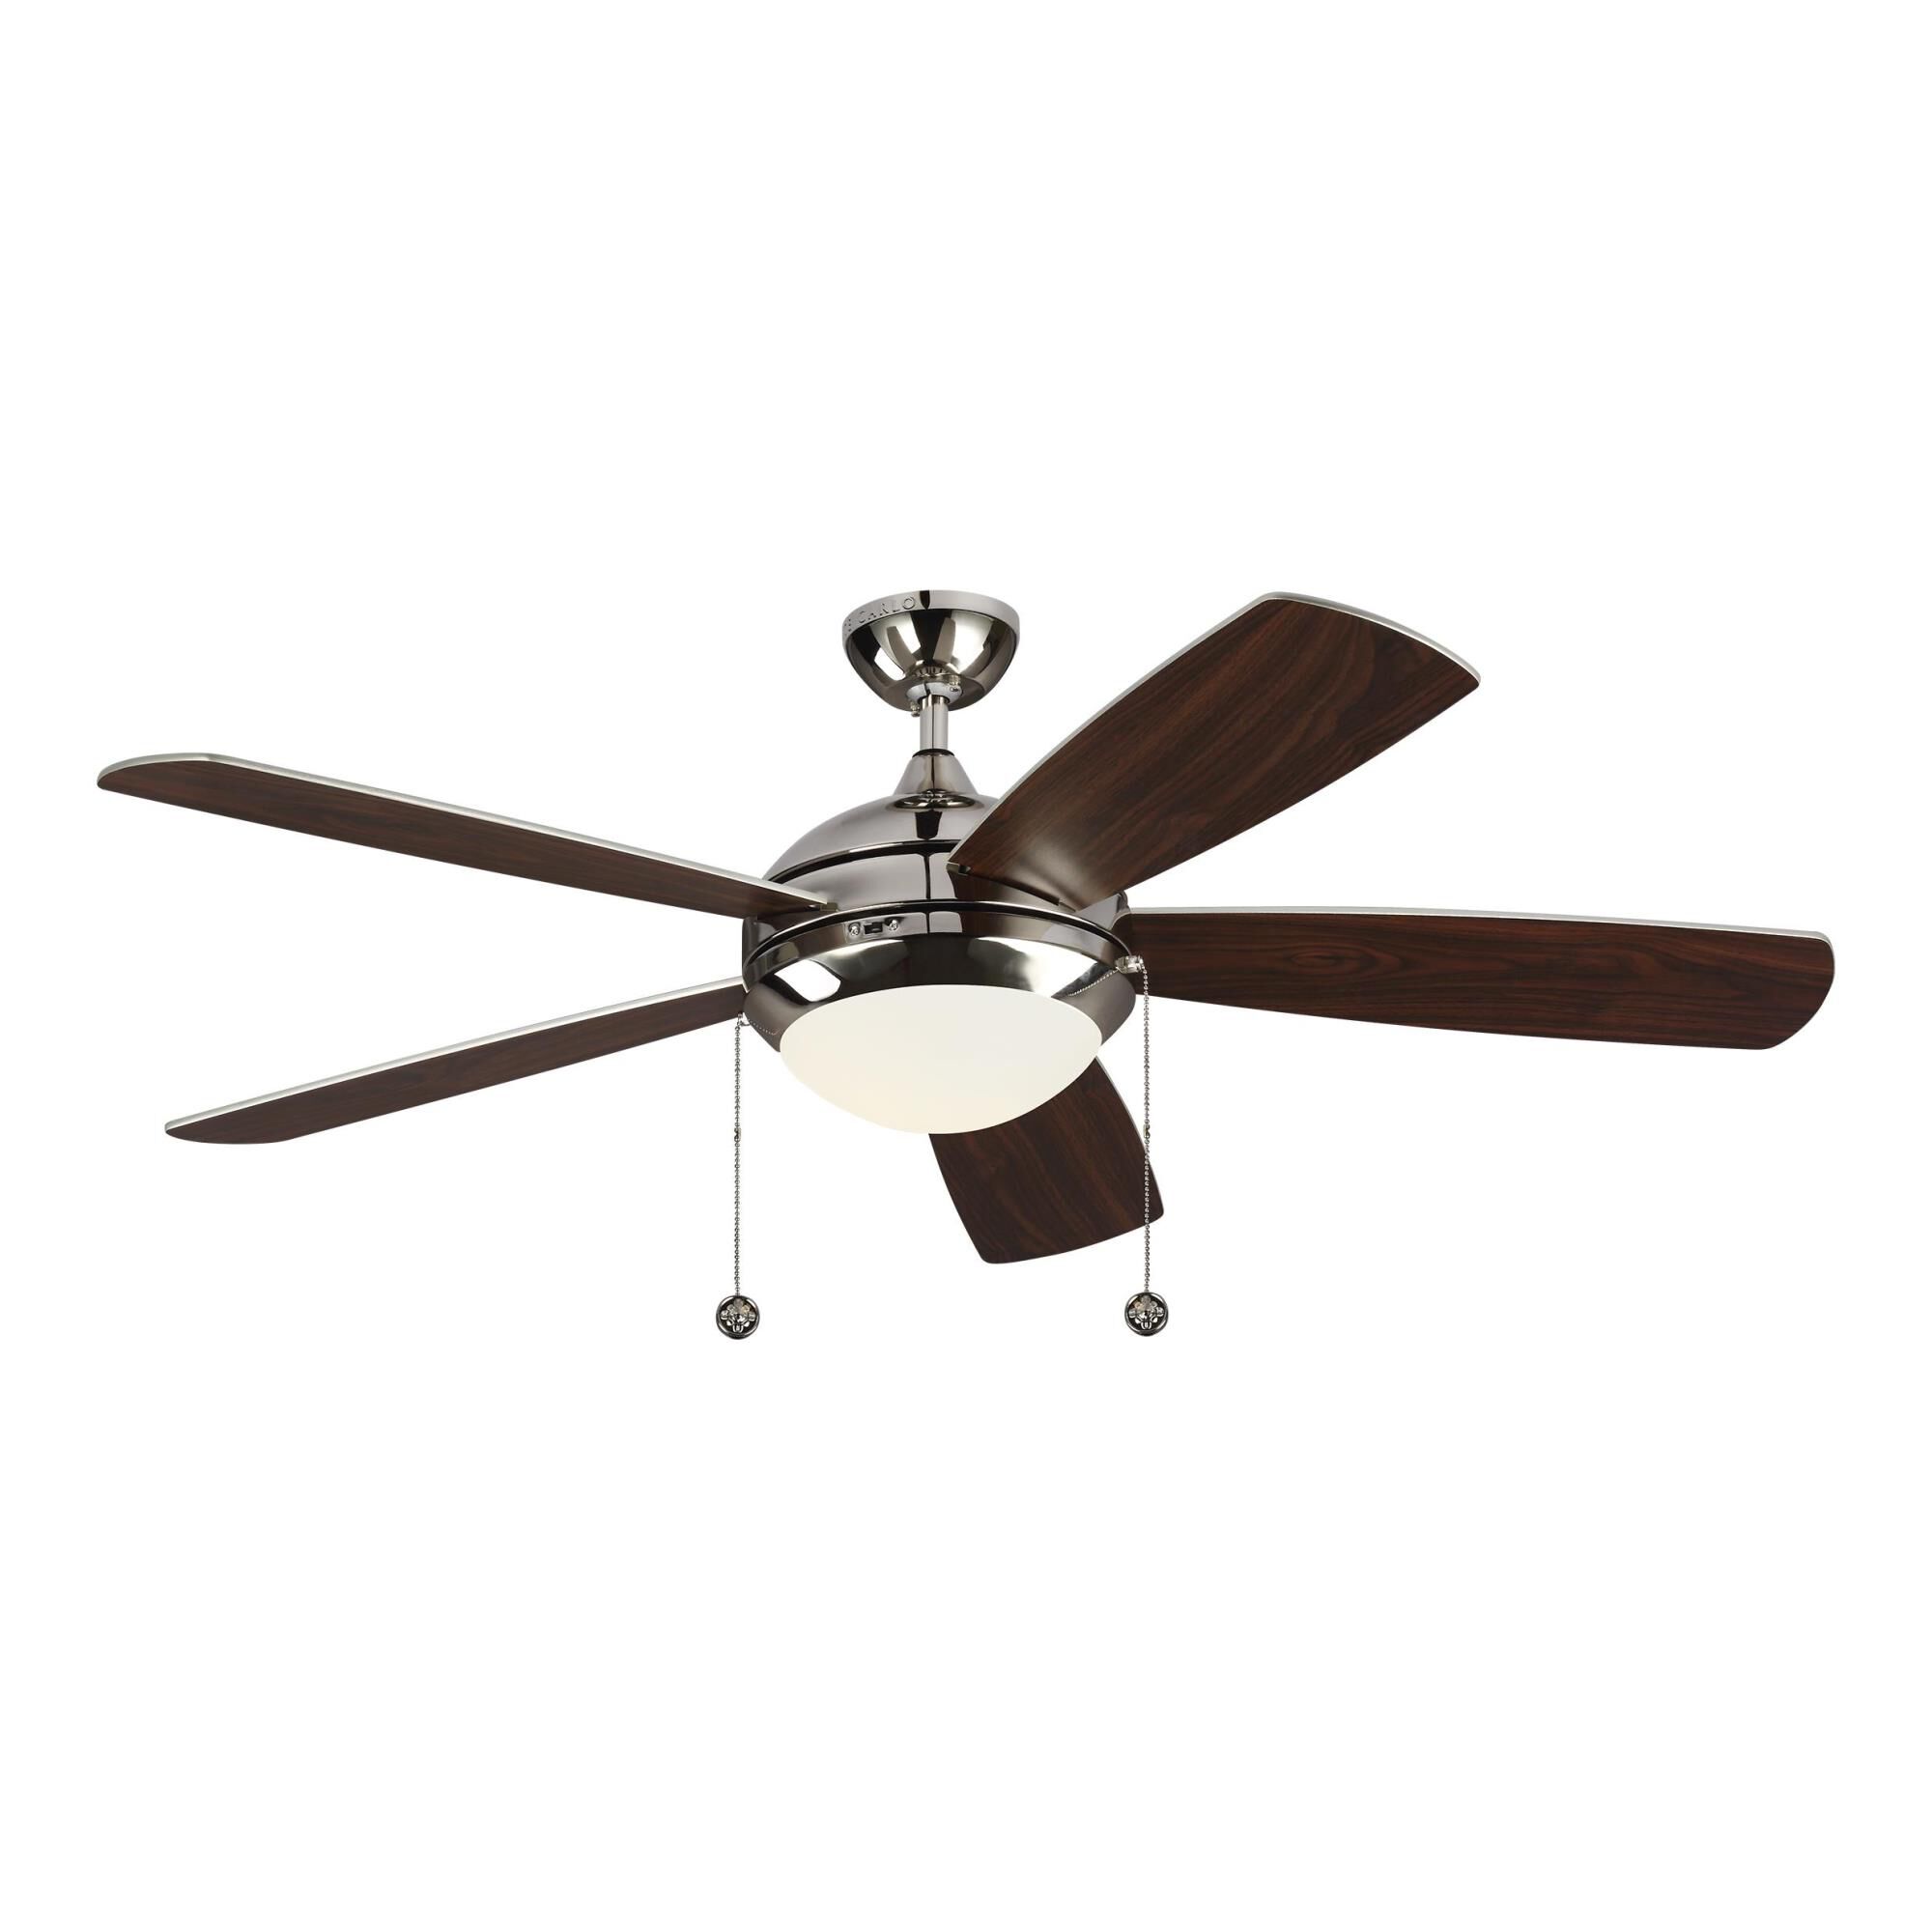 Photos - Fan Generation Lighting Discus Classic 52 Inch Ceiling  with Light Kit Disc